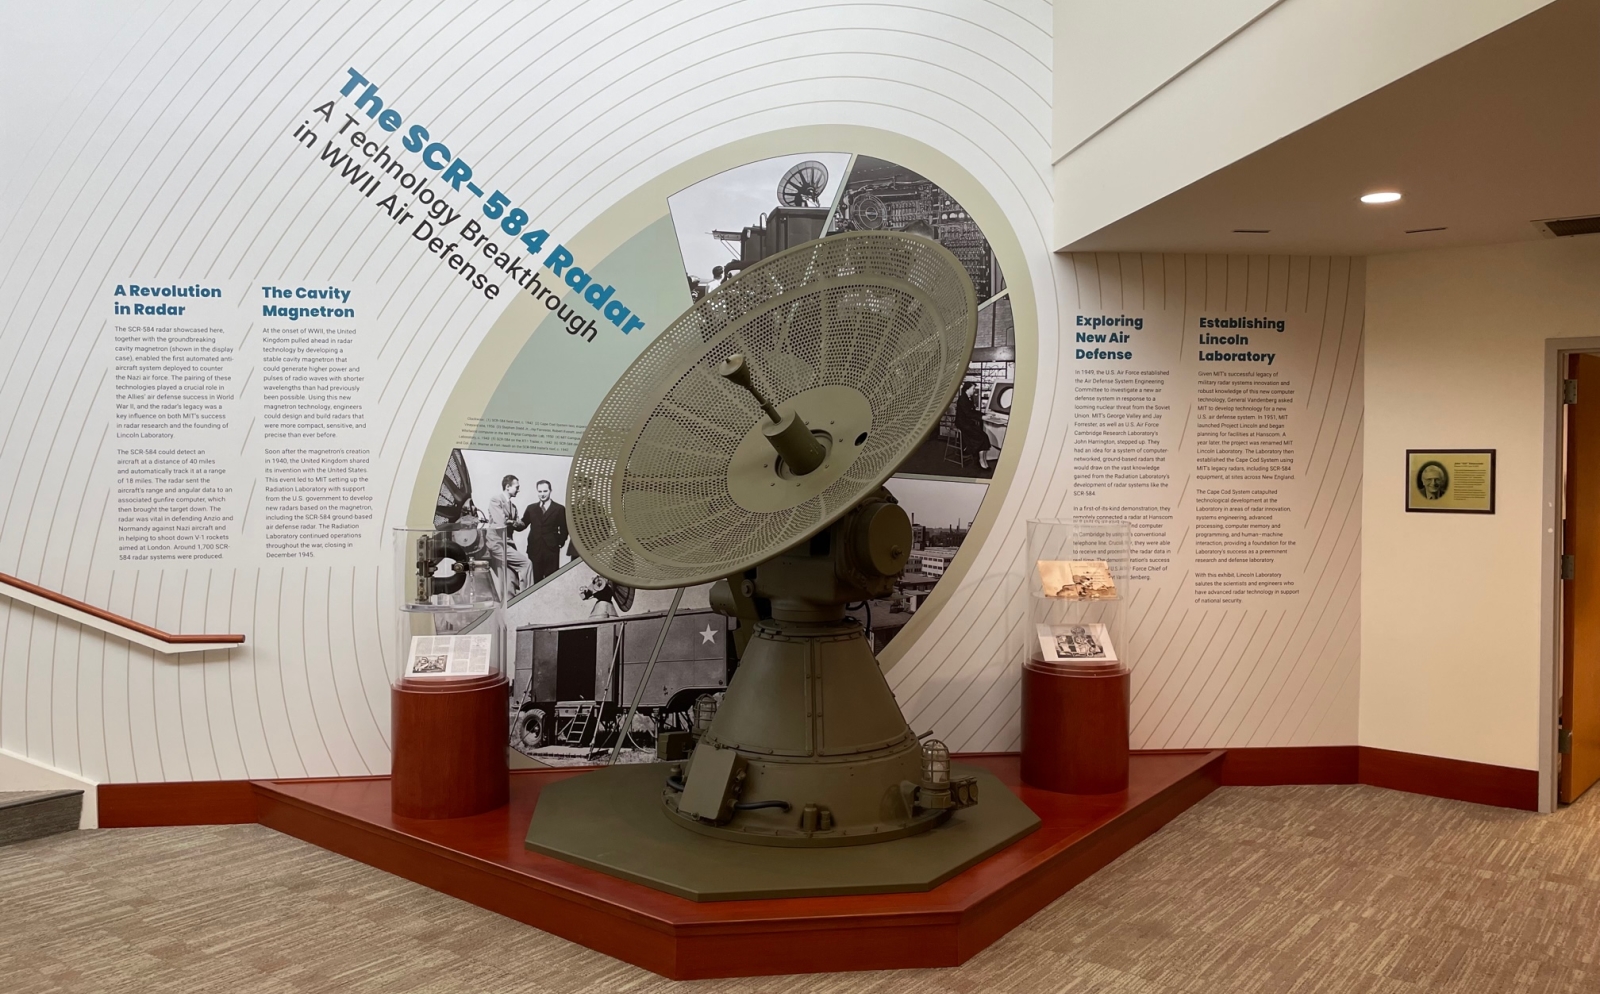 A photograph of the SCR-584 radar at Lincoln Laboratory in front of a wall of text about its development and use in World War II.